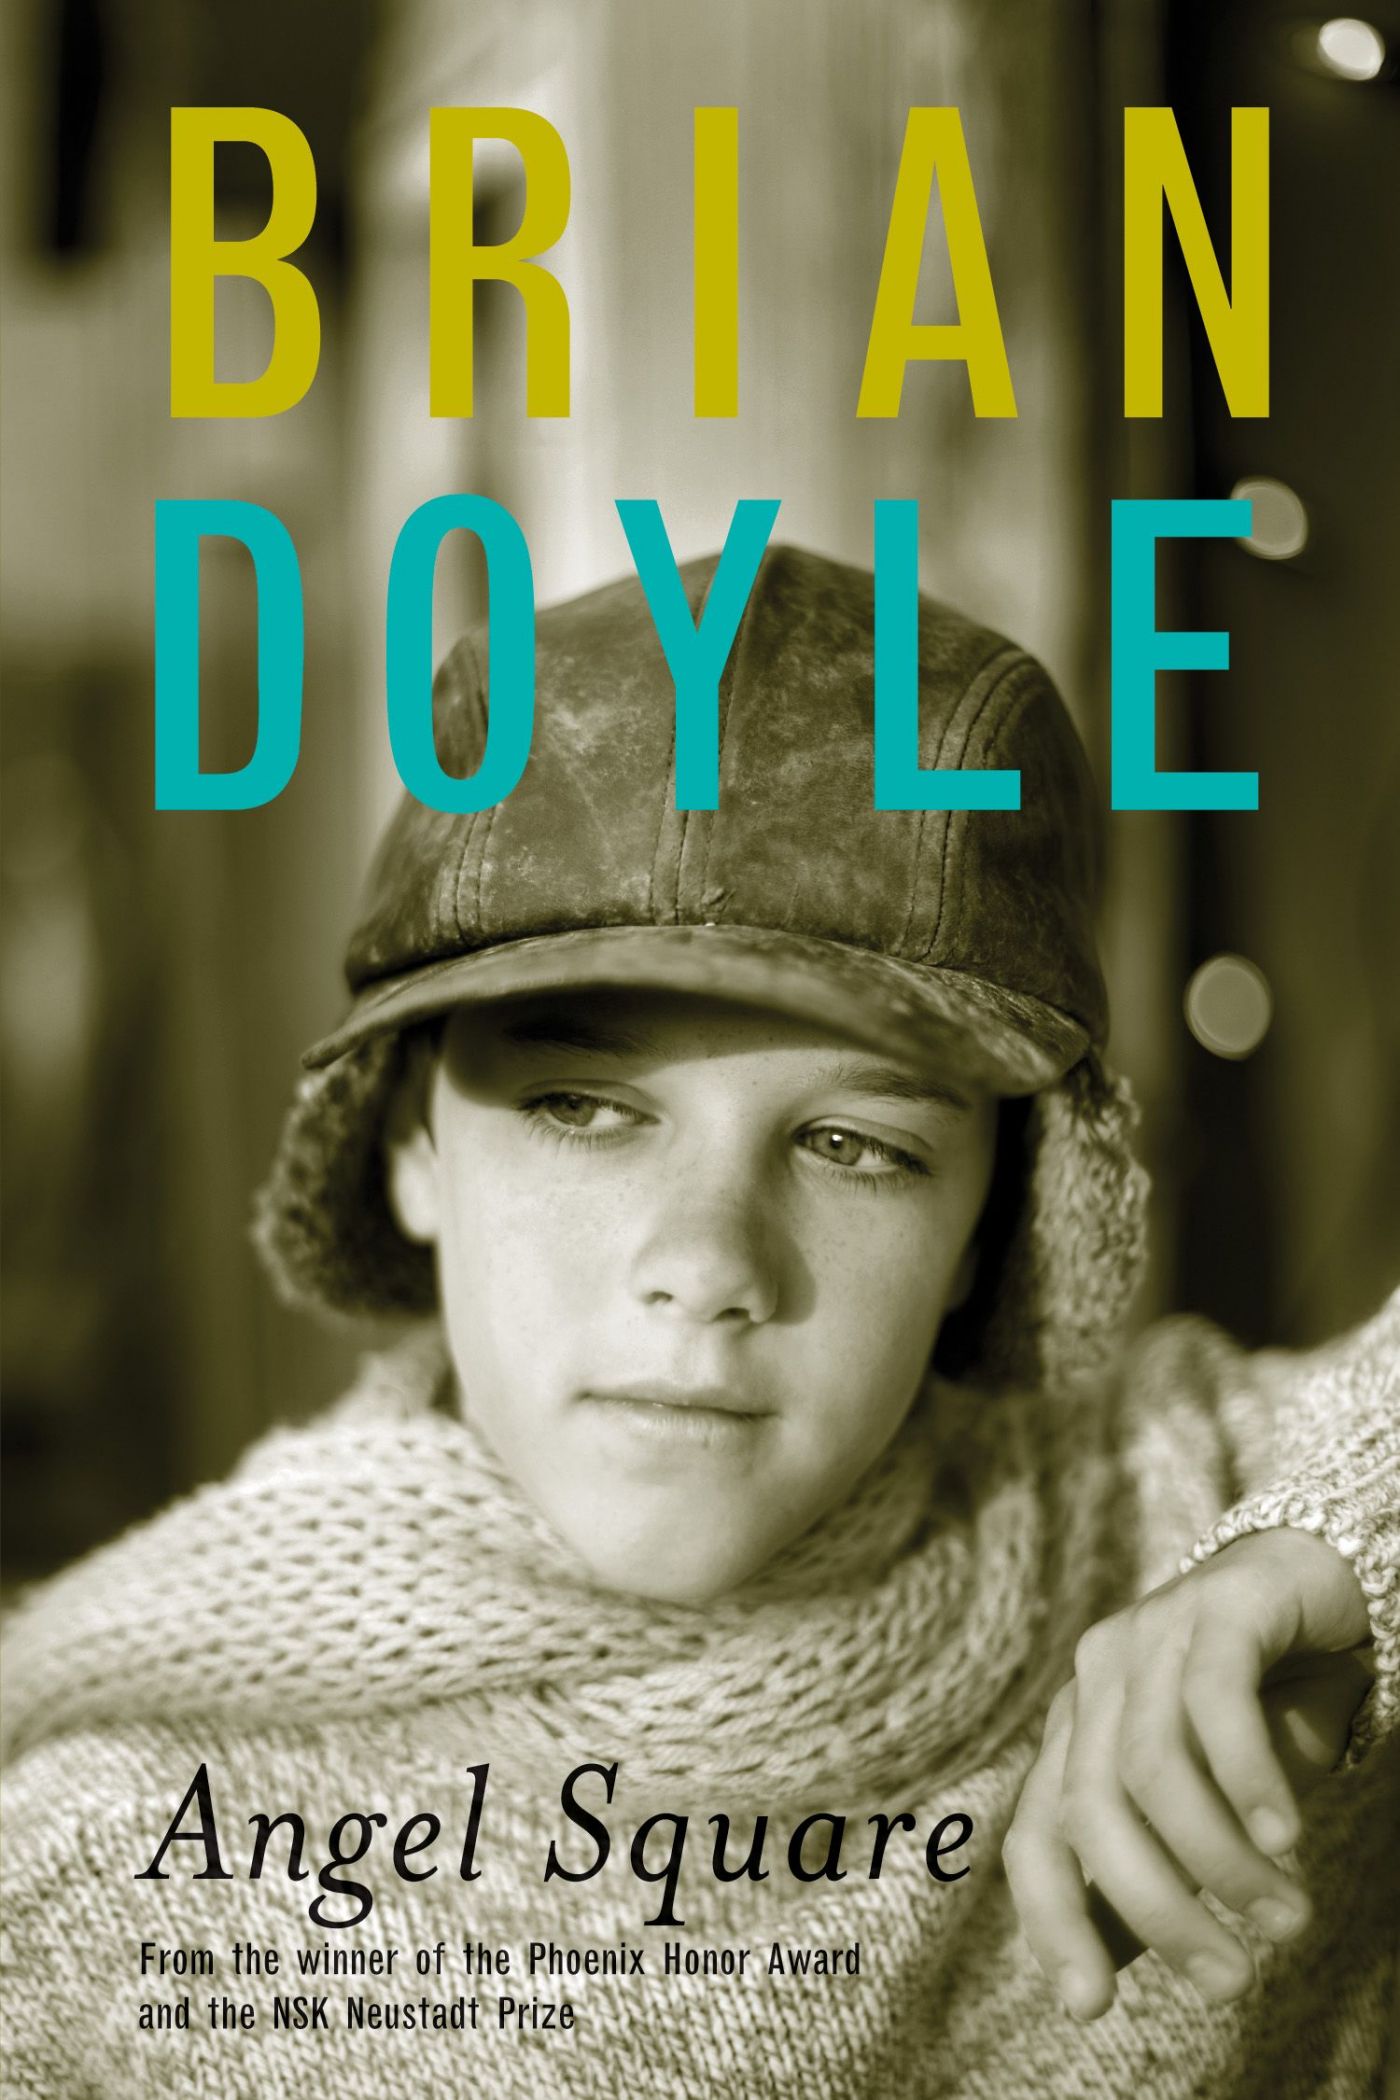 Colour photograph of a young boy wearing a wool cap and sweater, looking thoughtful. Text typewritten in English. The author’s name appears in yellow and blue.